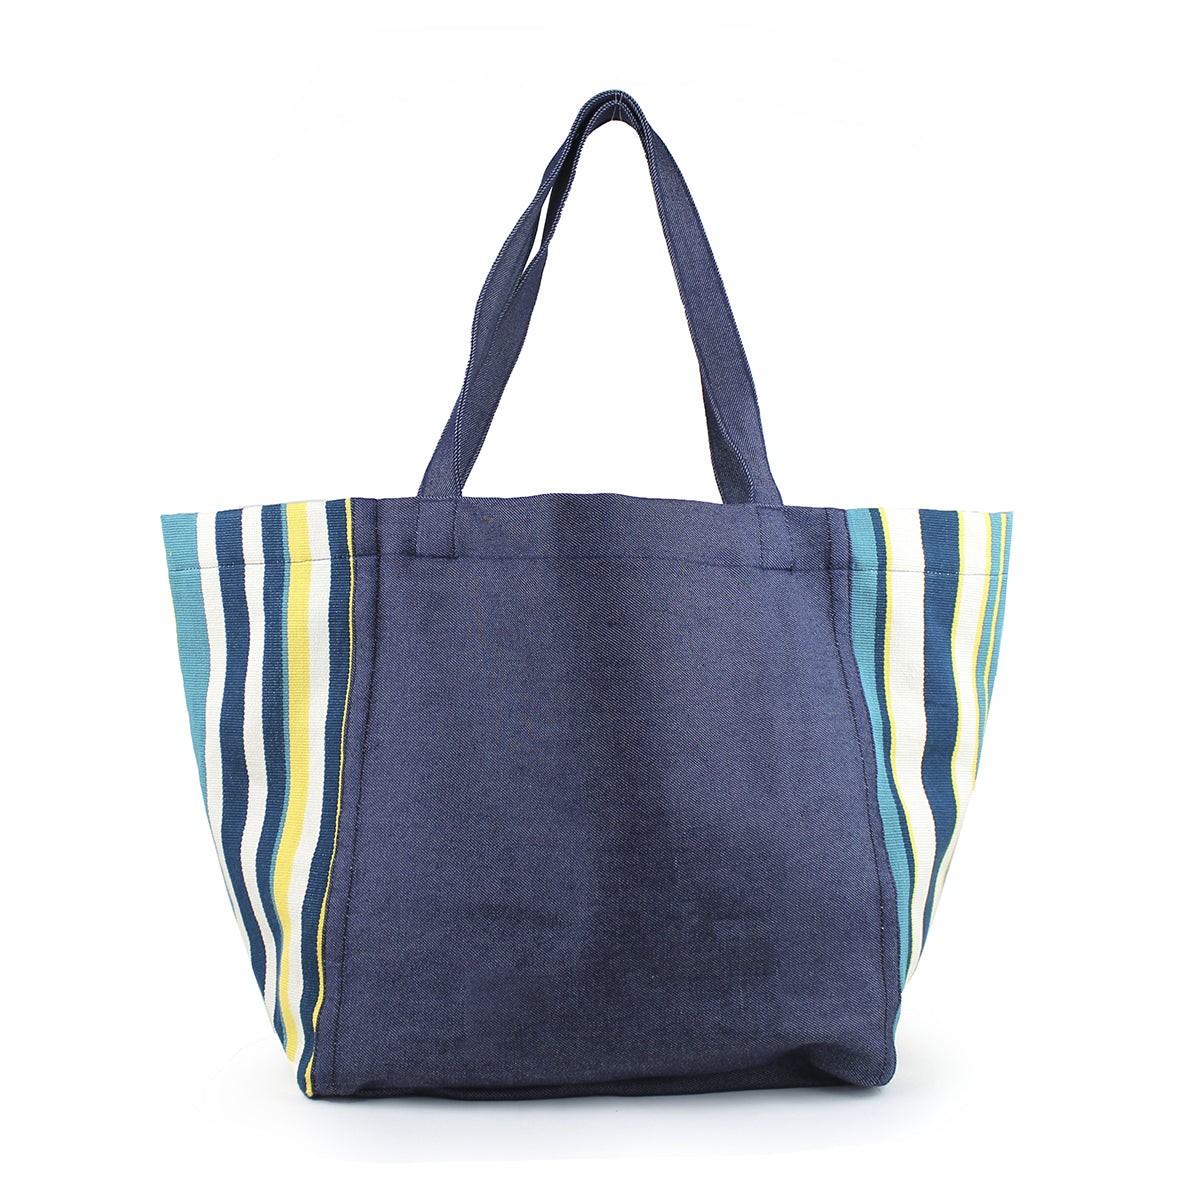 Blanca Handwoven Tote Denim Pacific. The bag has a dark wash denim center and handles. The ends of the bags have a triangle finish in vertical blue and yellow stripes.